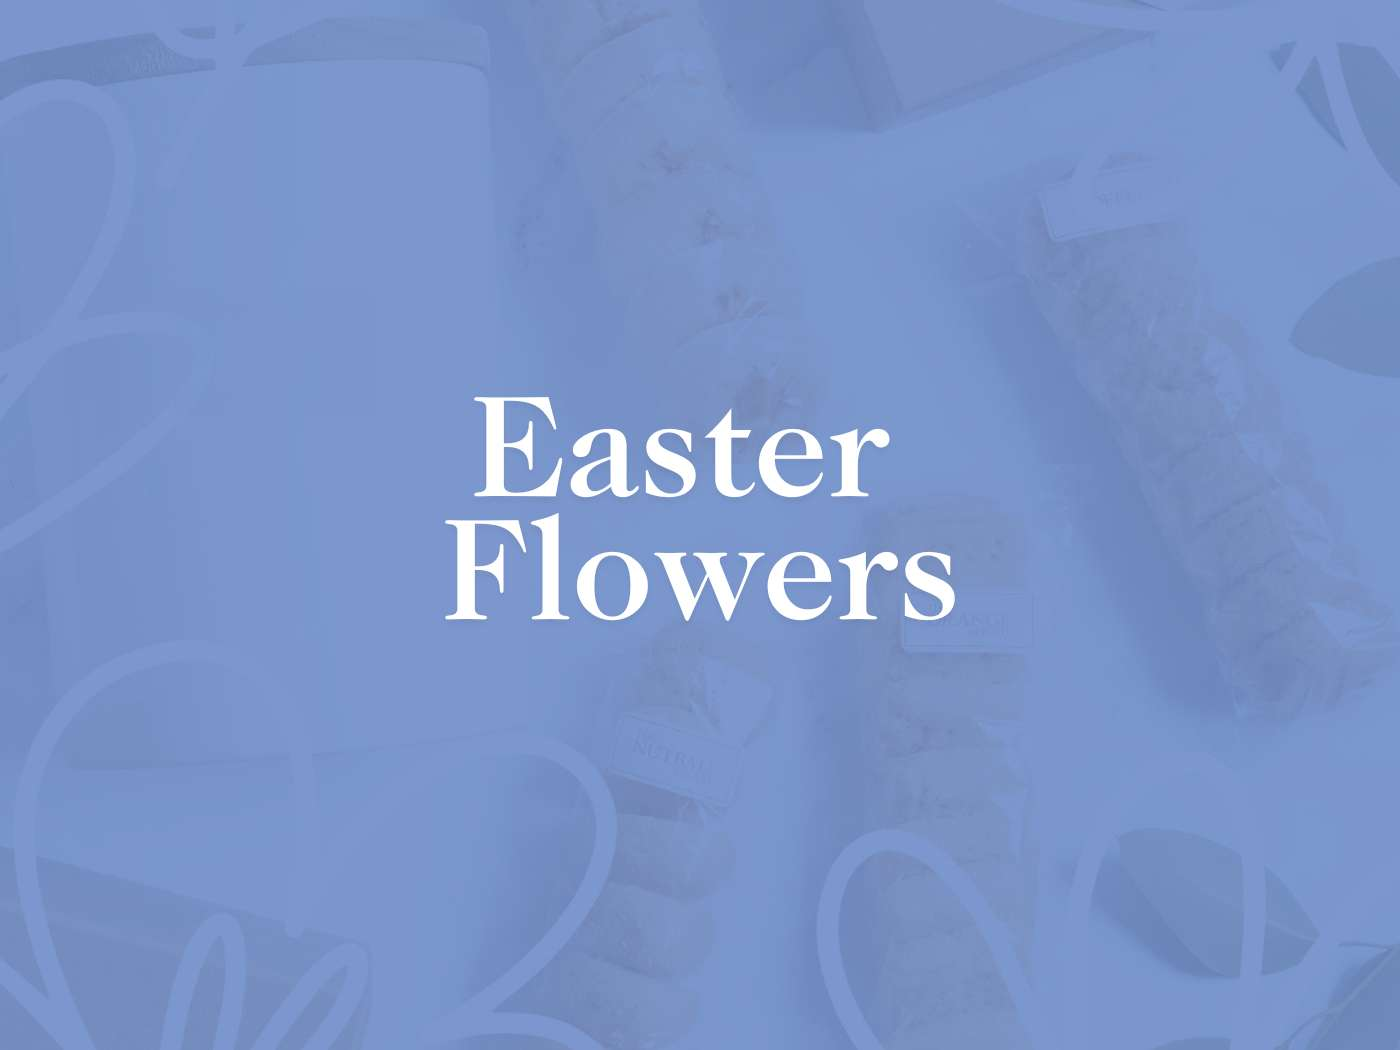 Promotional image for the Easter Flowers Collection with a serene blue floral background, presented by Fabulous Flowers and Gifts for Easter Sunday.